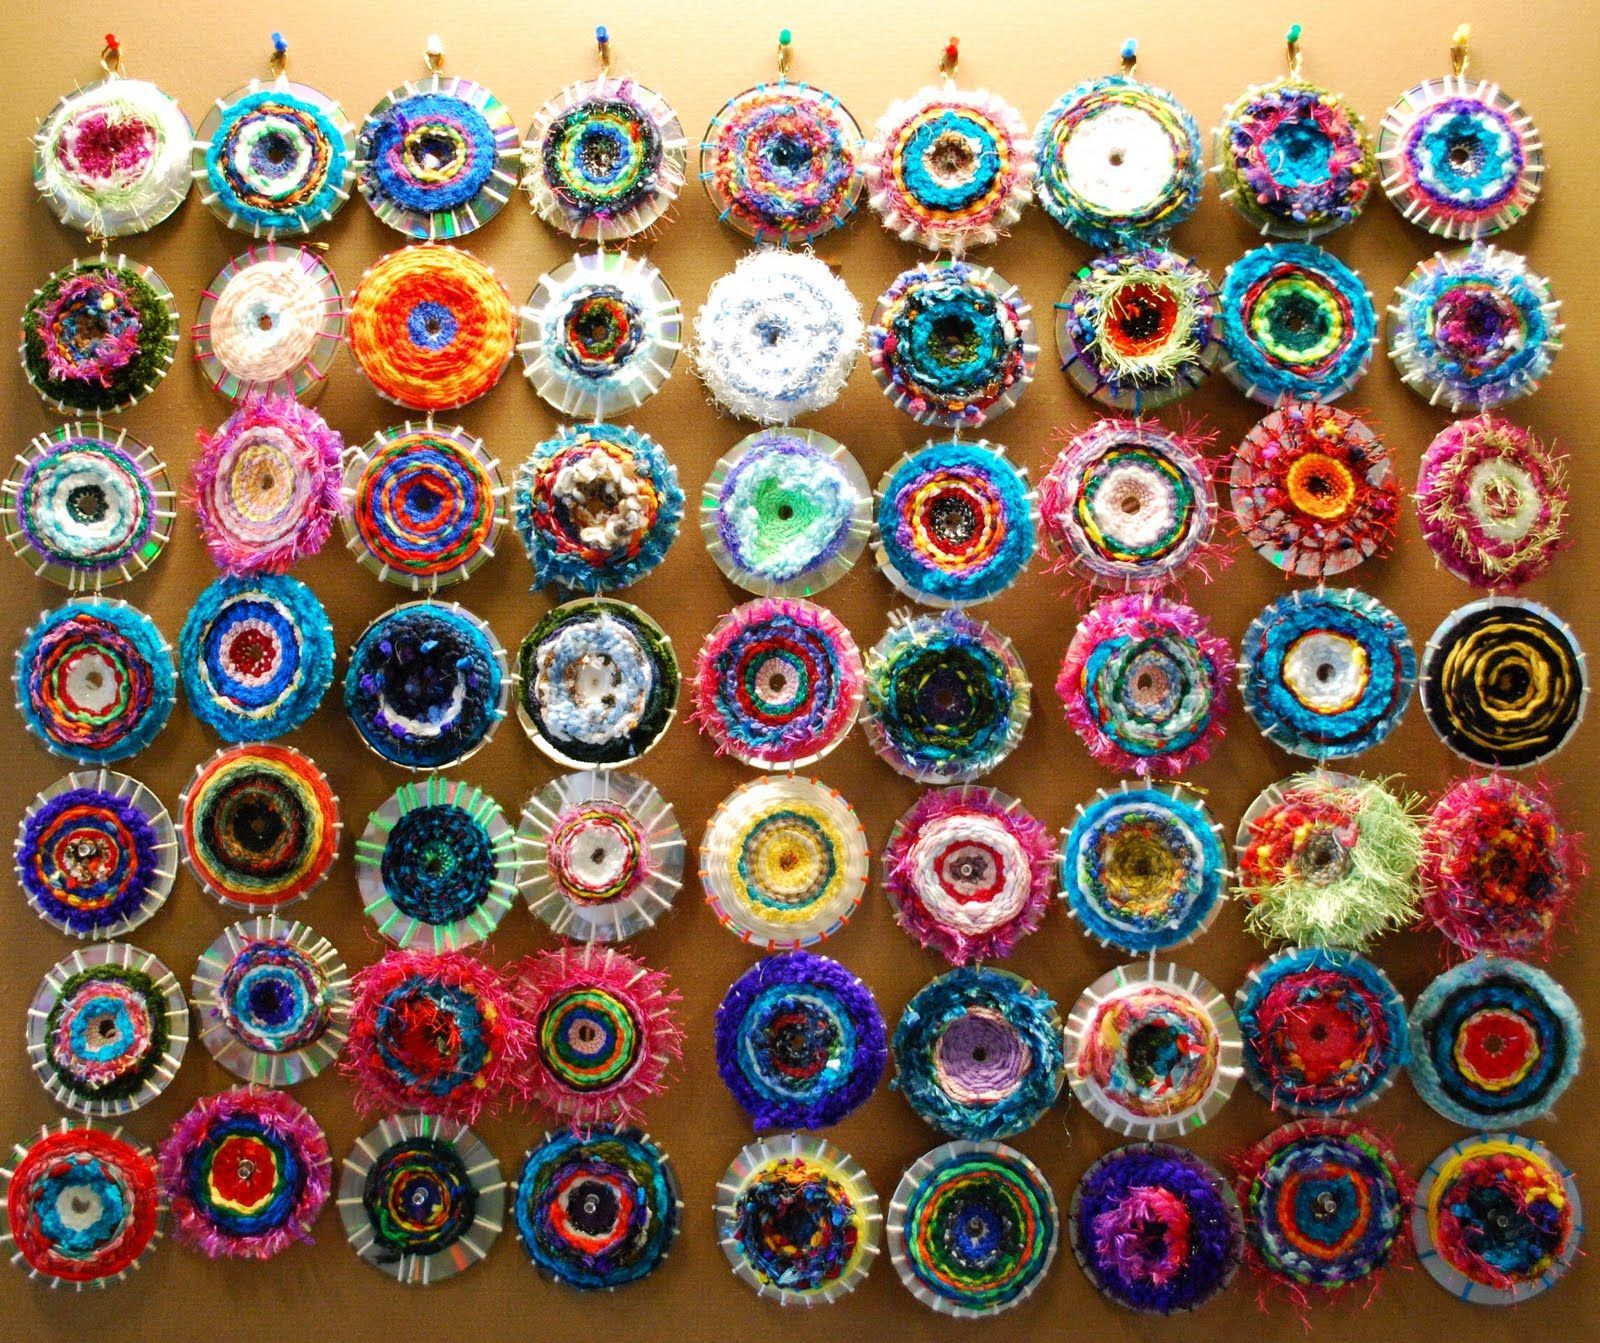 Amazing weavings on old CDs. What a great idea for the wall at the daycare in the older childrens room. They could take them home